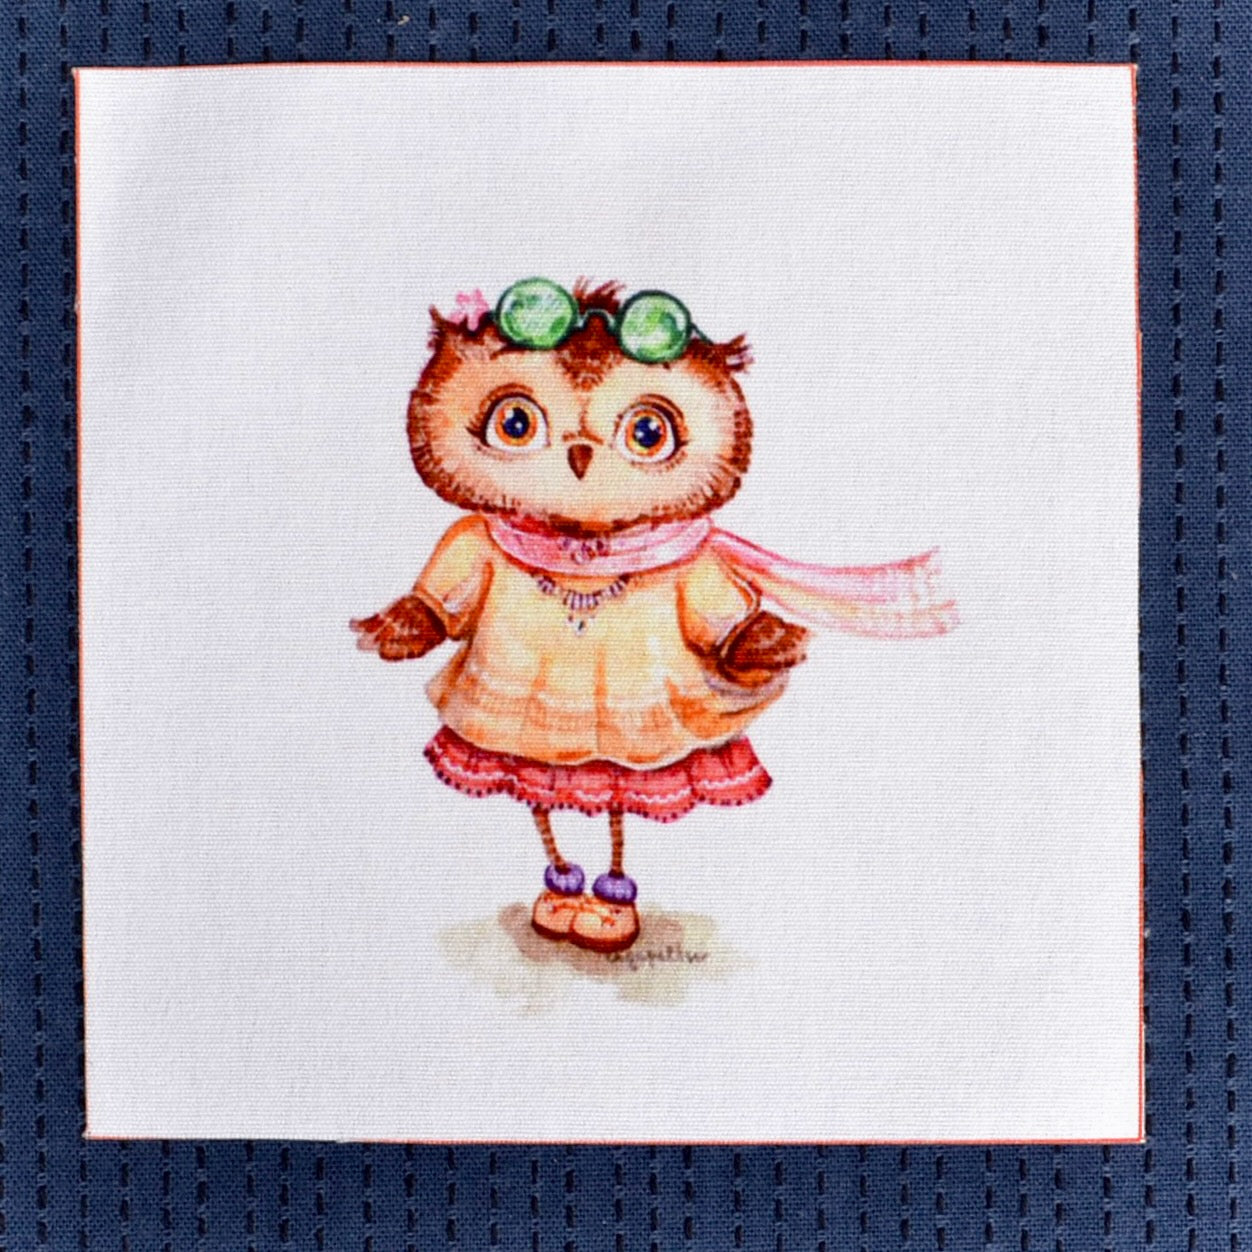 Owl with scarf and sunglasses fabric patch